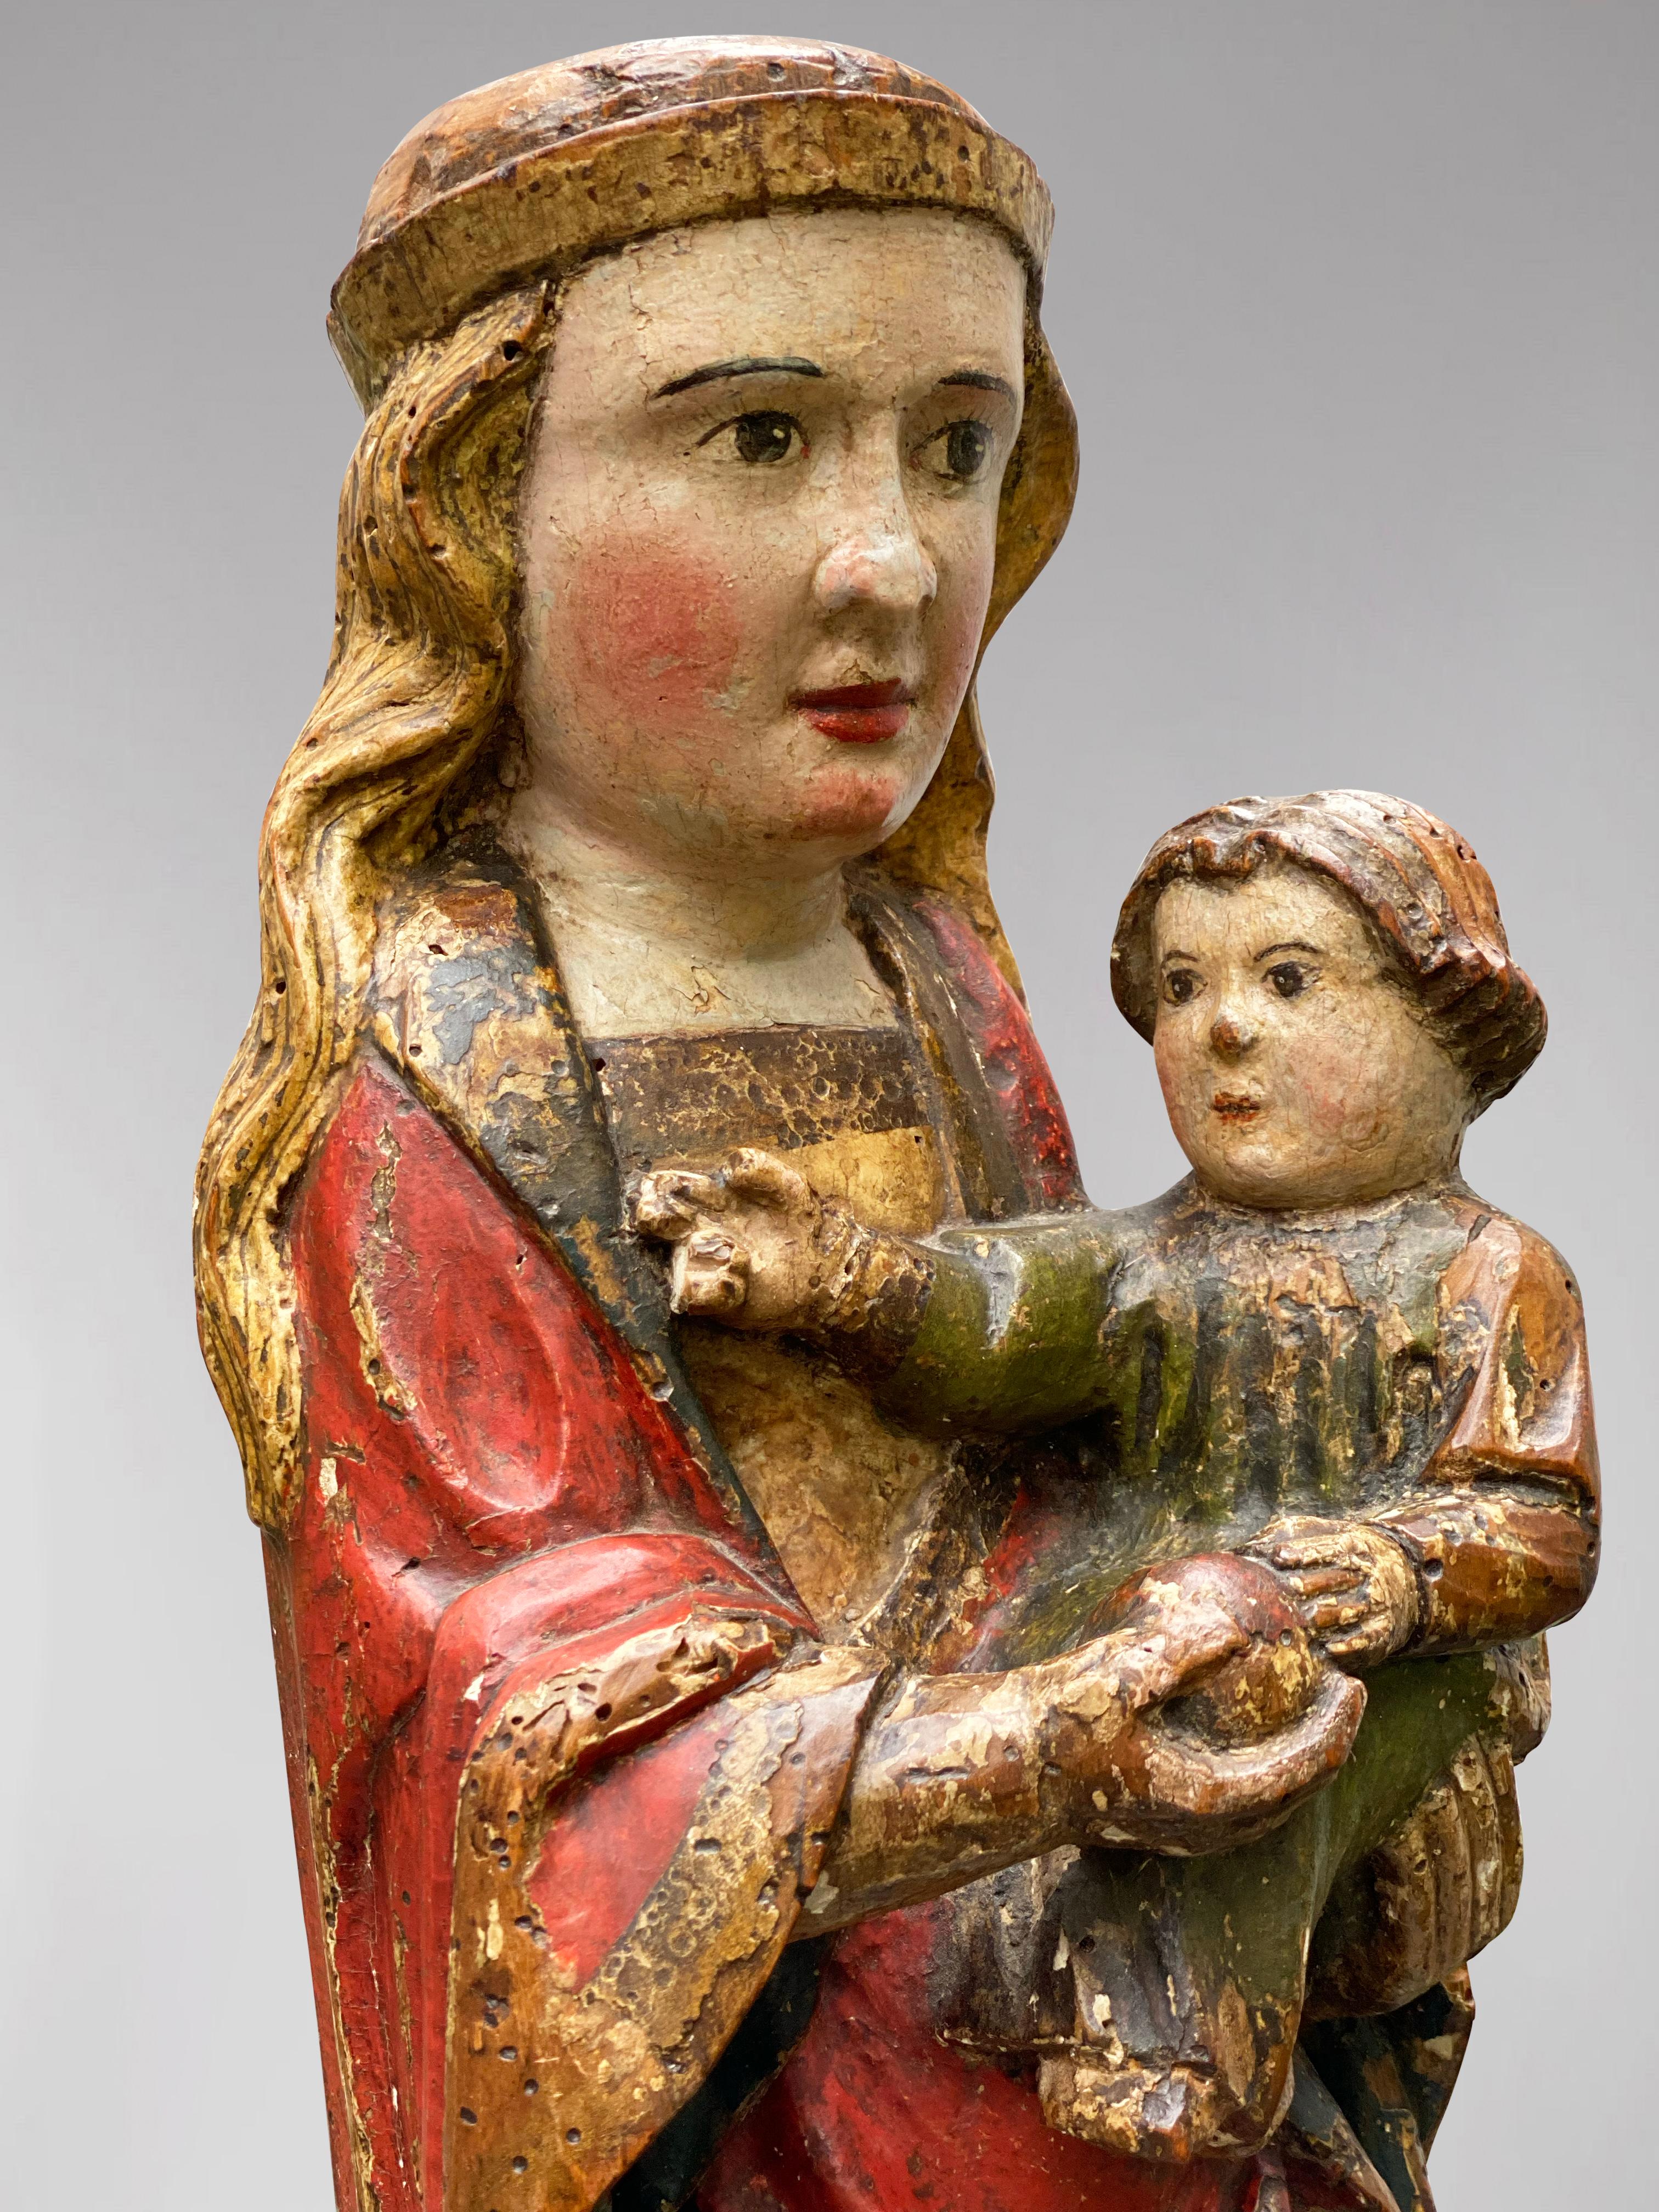 A Spanish Statue of the Virgin Mary with Child Jezus, circa 1600 - Renaissance Sculpture by Unknown